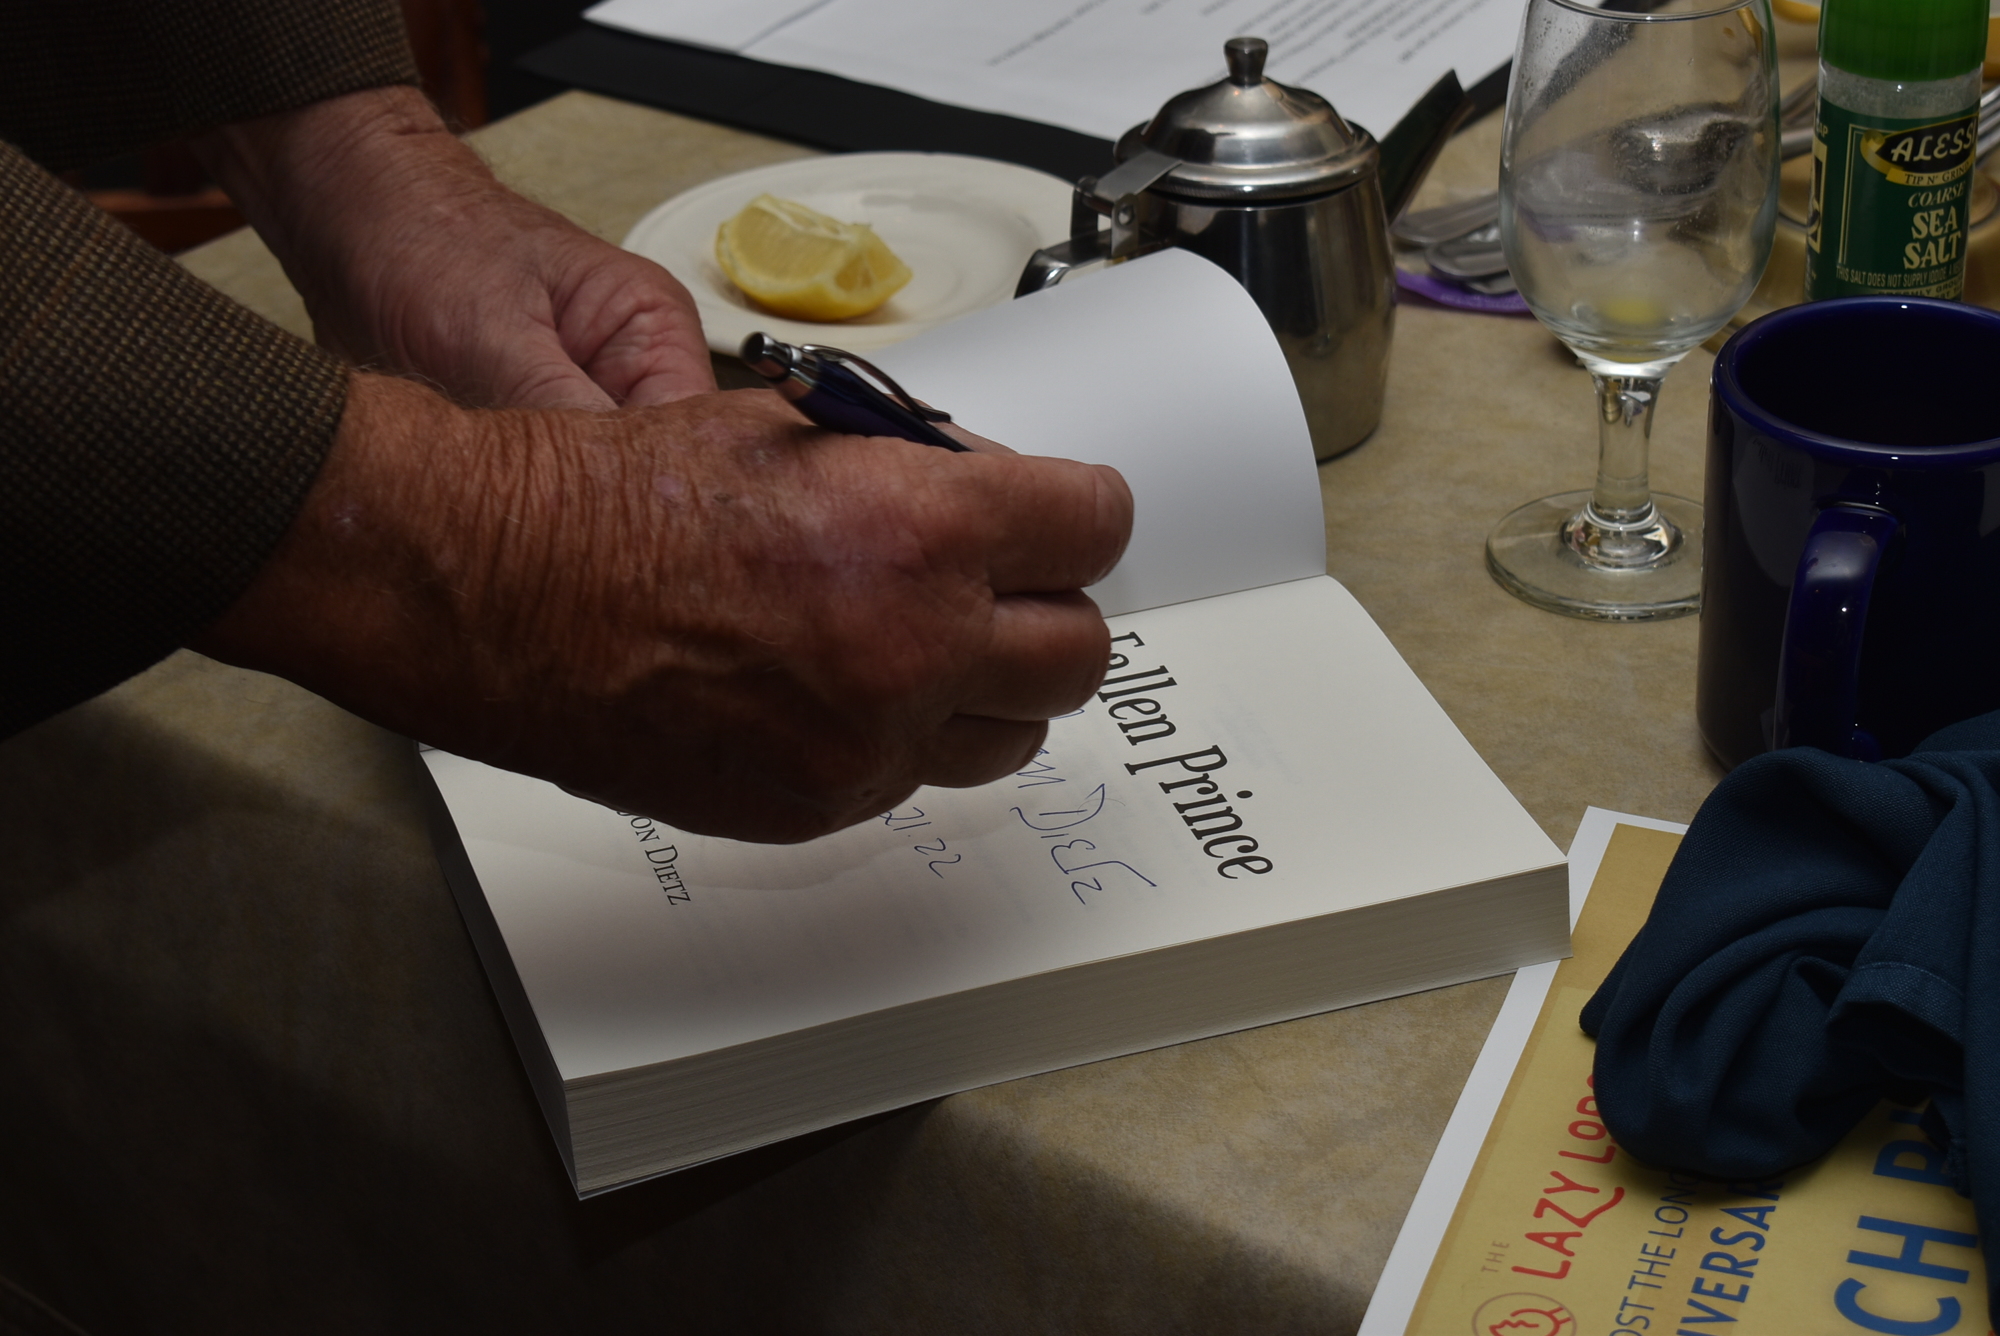 Jon Dietz signs a copy of his book. He donated all proceeds from April 21 to a Kiwanis club in Kiev, Ukraine.